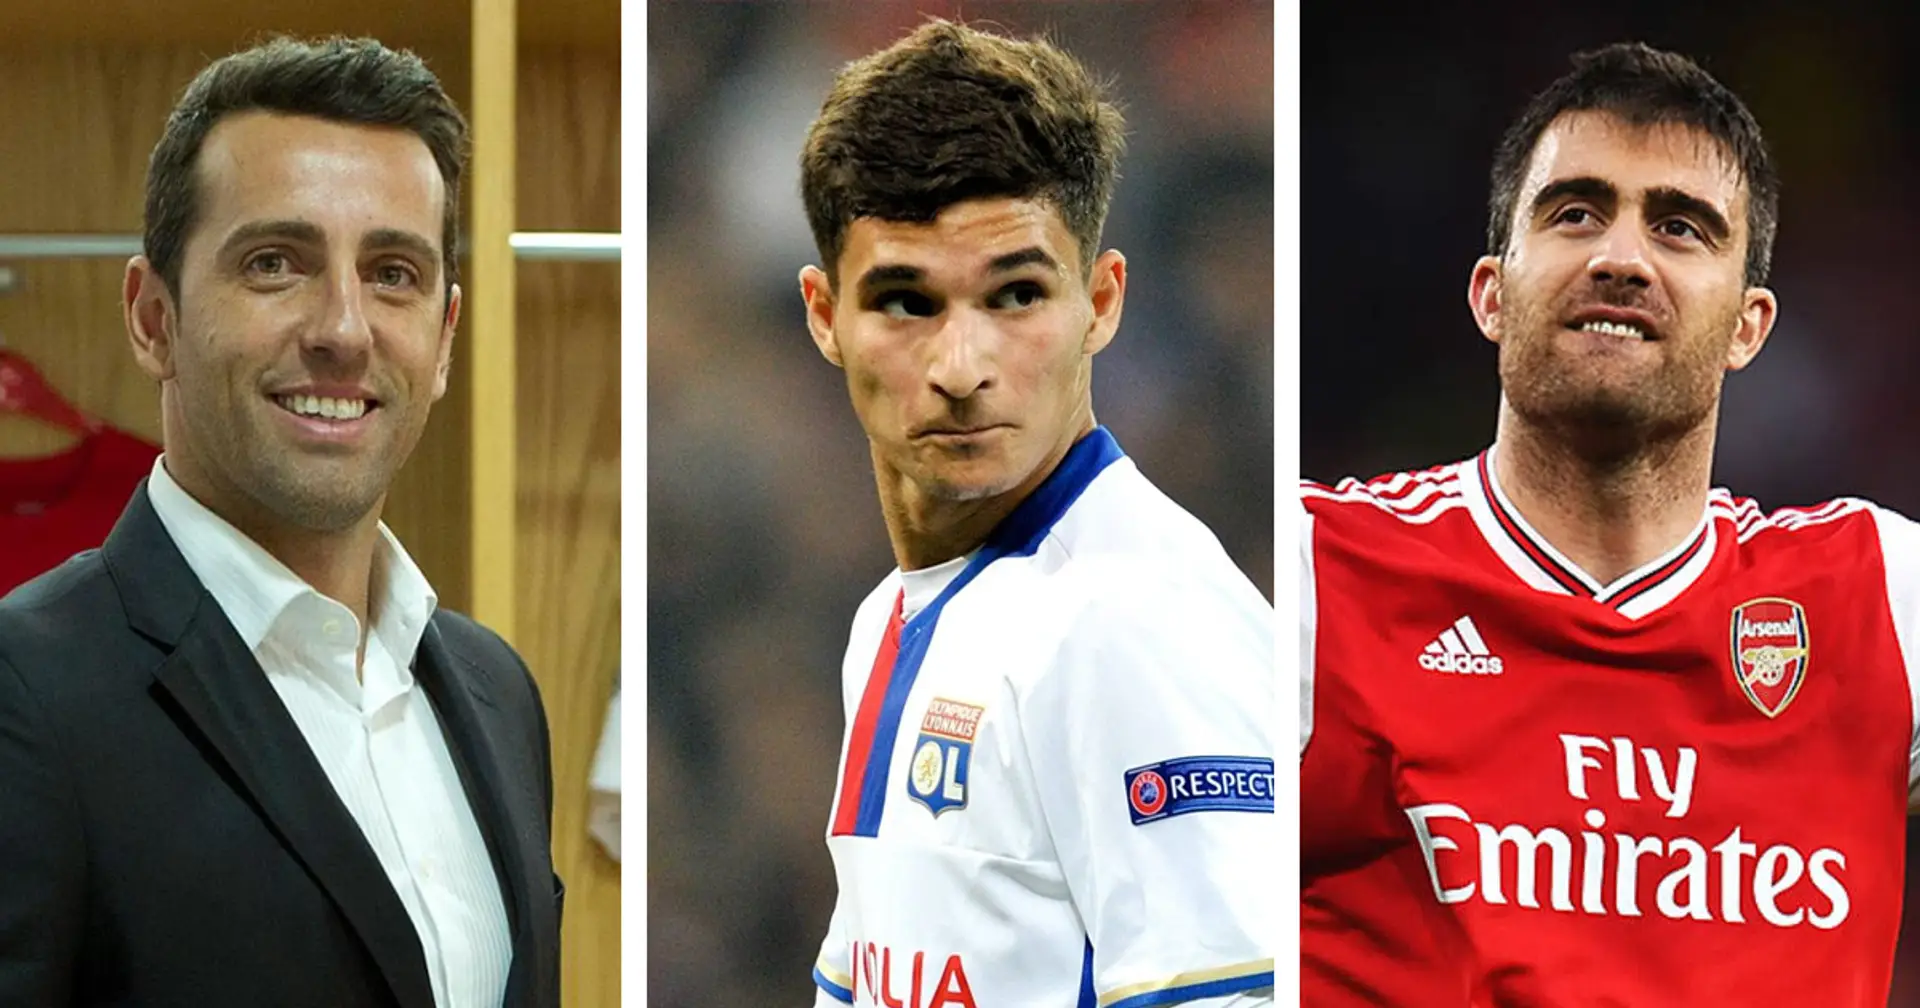 Do not deal with Lyon & 3 more things Arsenal should learn from this transfer window